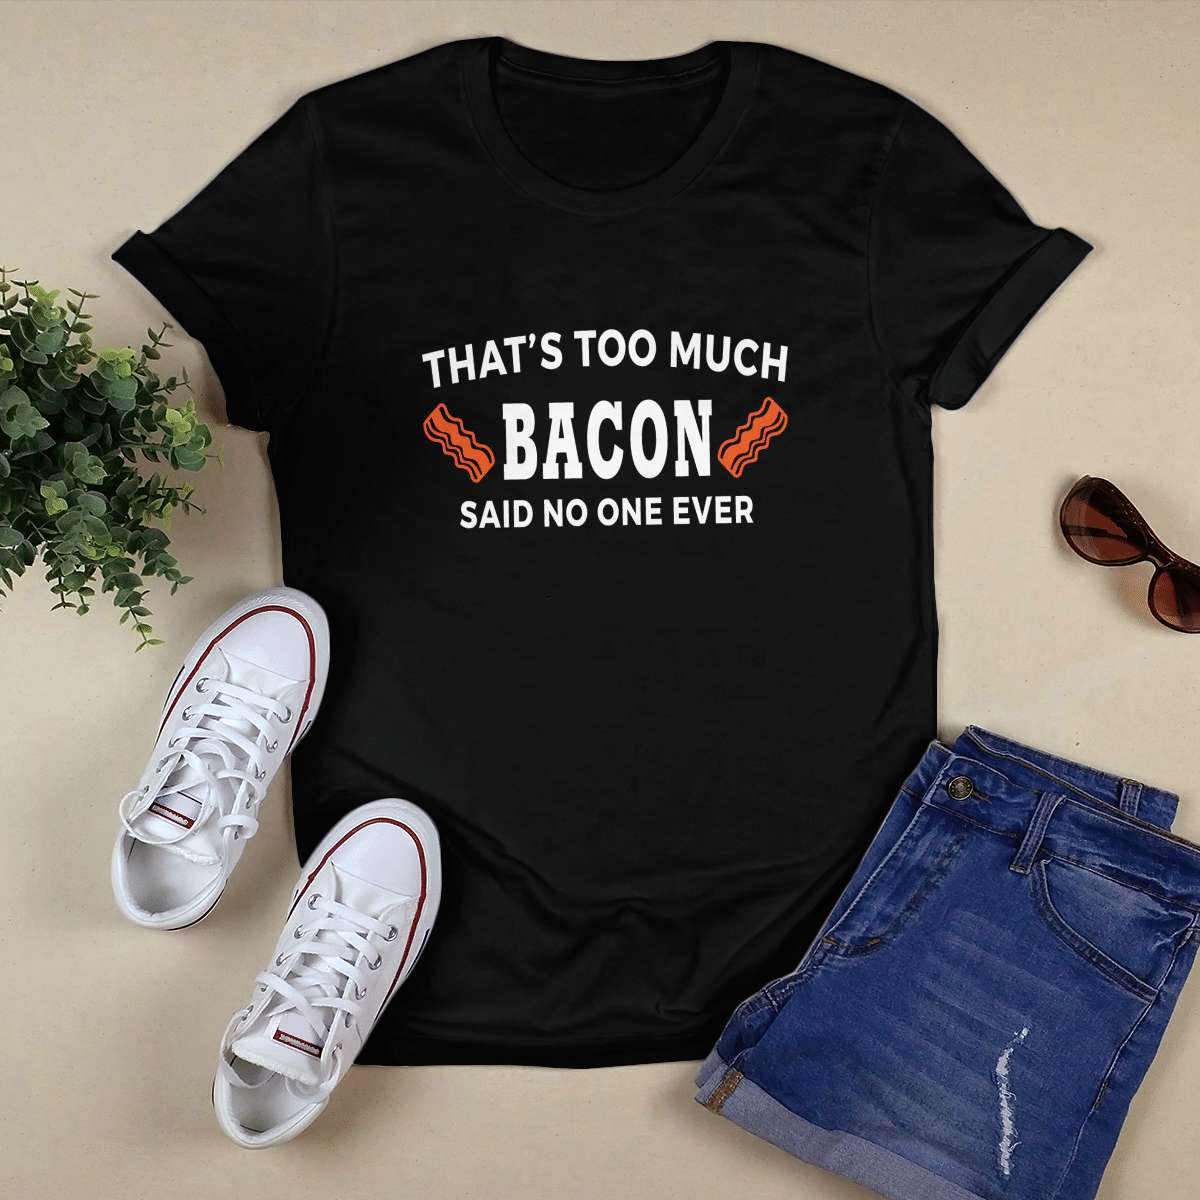 That's too much bacon said no one ever